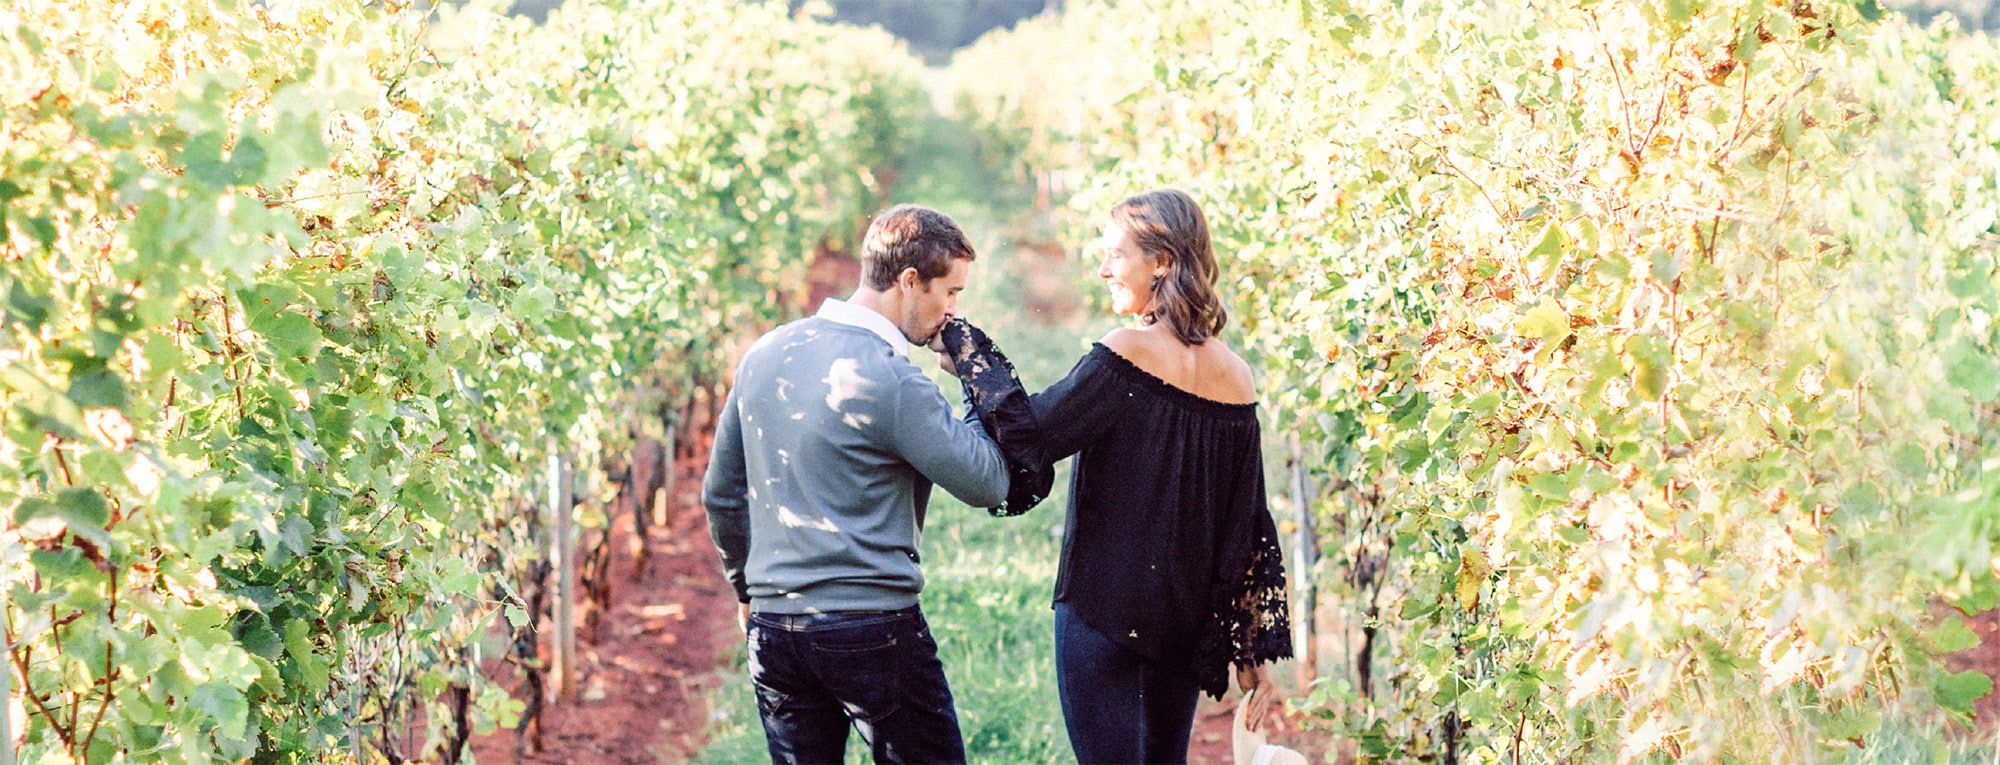 A couple taking a romantic walk through grapevines in fall at Barboursville Vineyards, an award-winning Virginia winery.